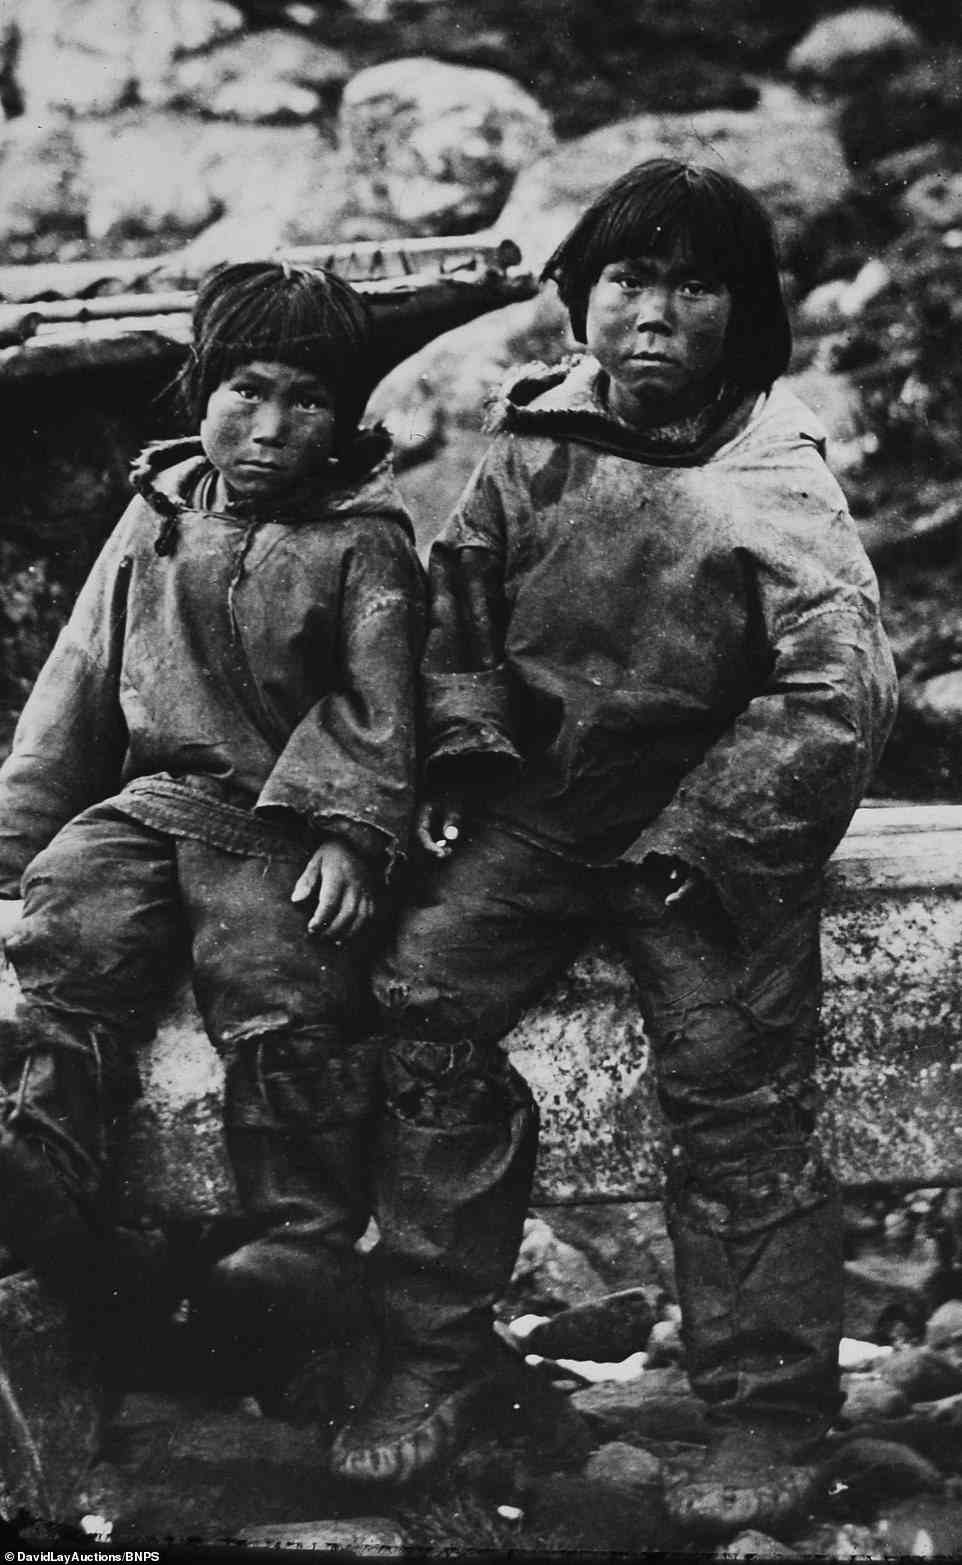 Two children wear heavy boots and big jackets as they go about their daily life in Labrador in the years before Spanish Flu wiped out a huge number of the Inuit community